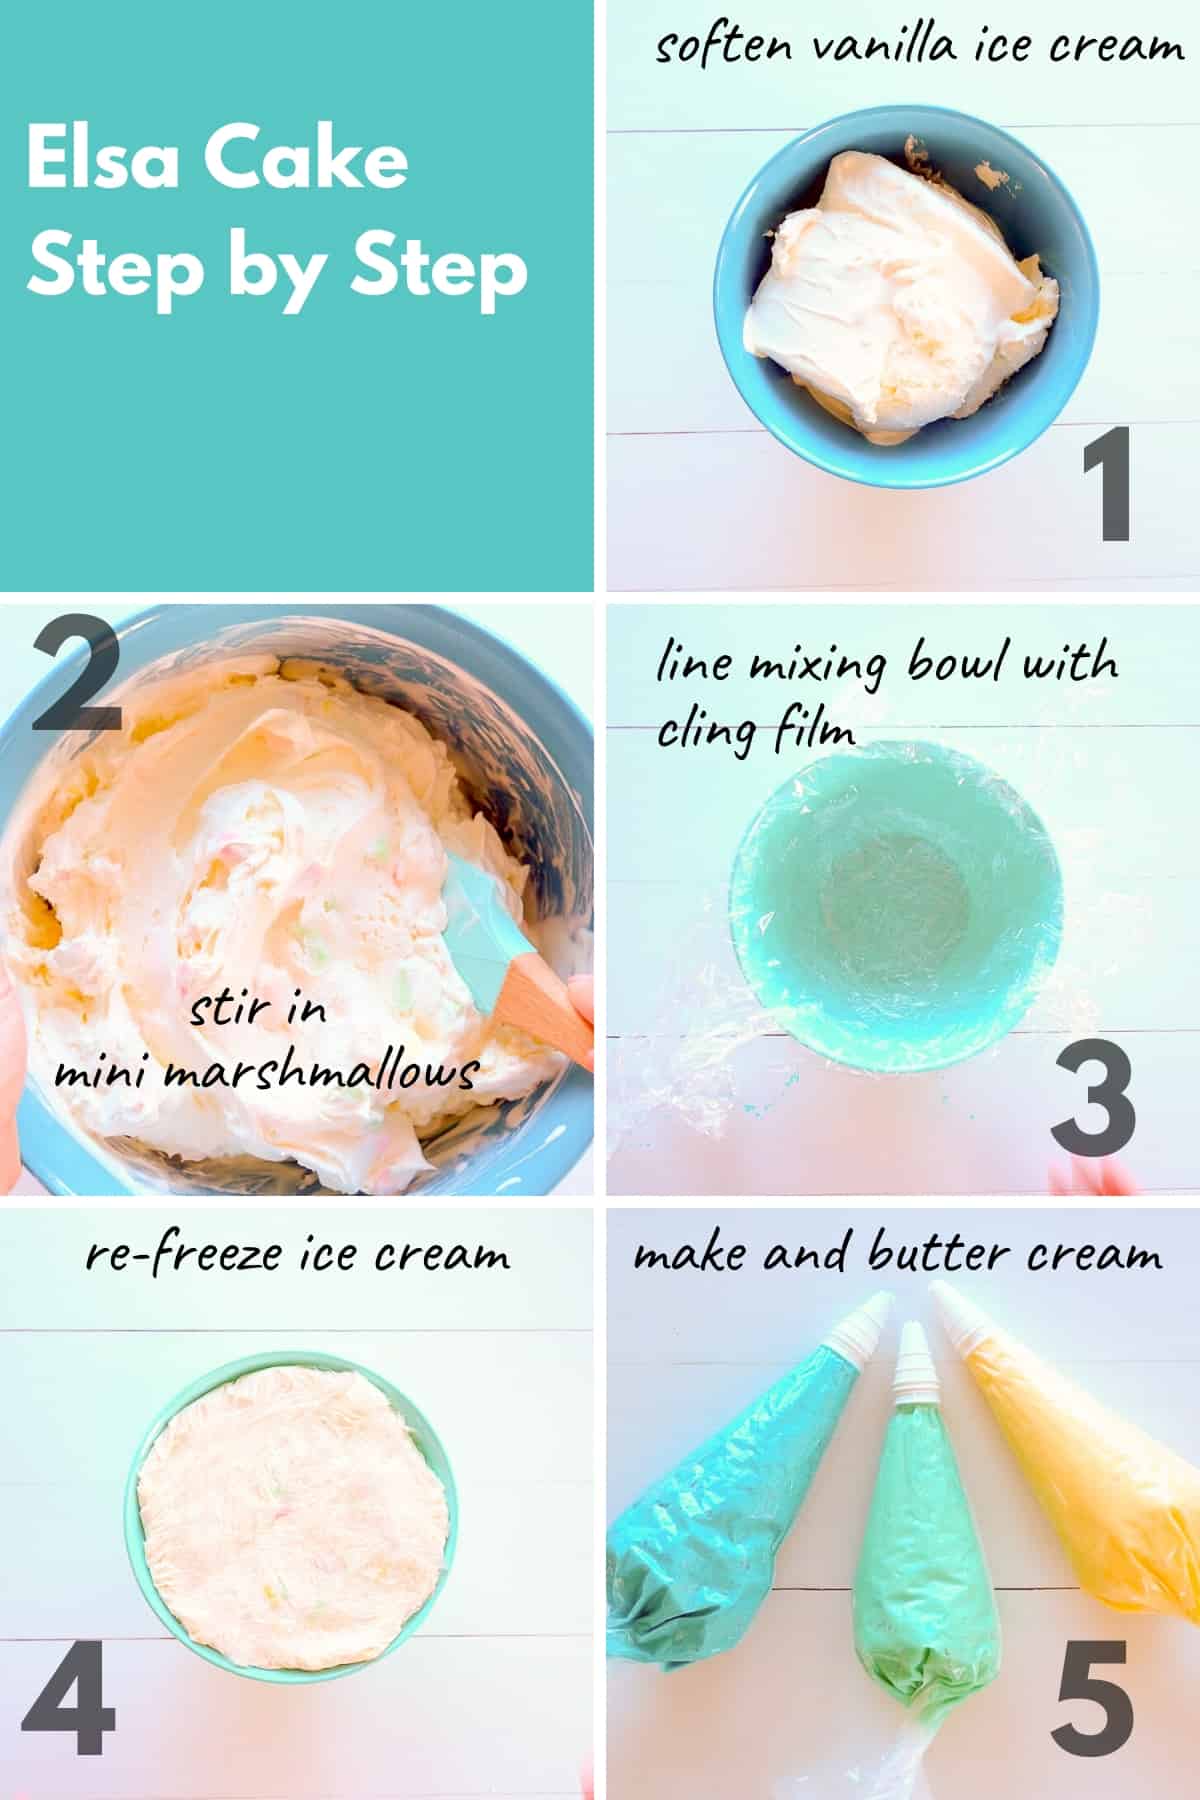 Collage showing step by step instructions to make an ice cream cake